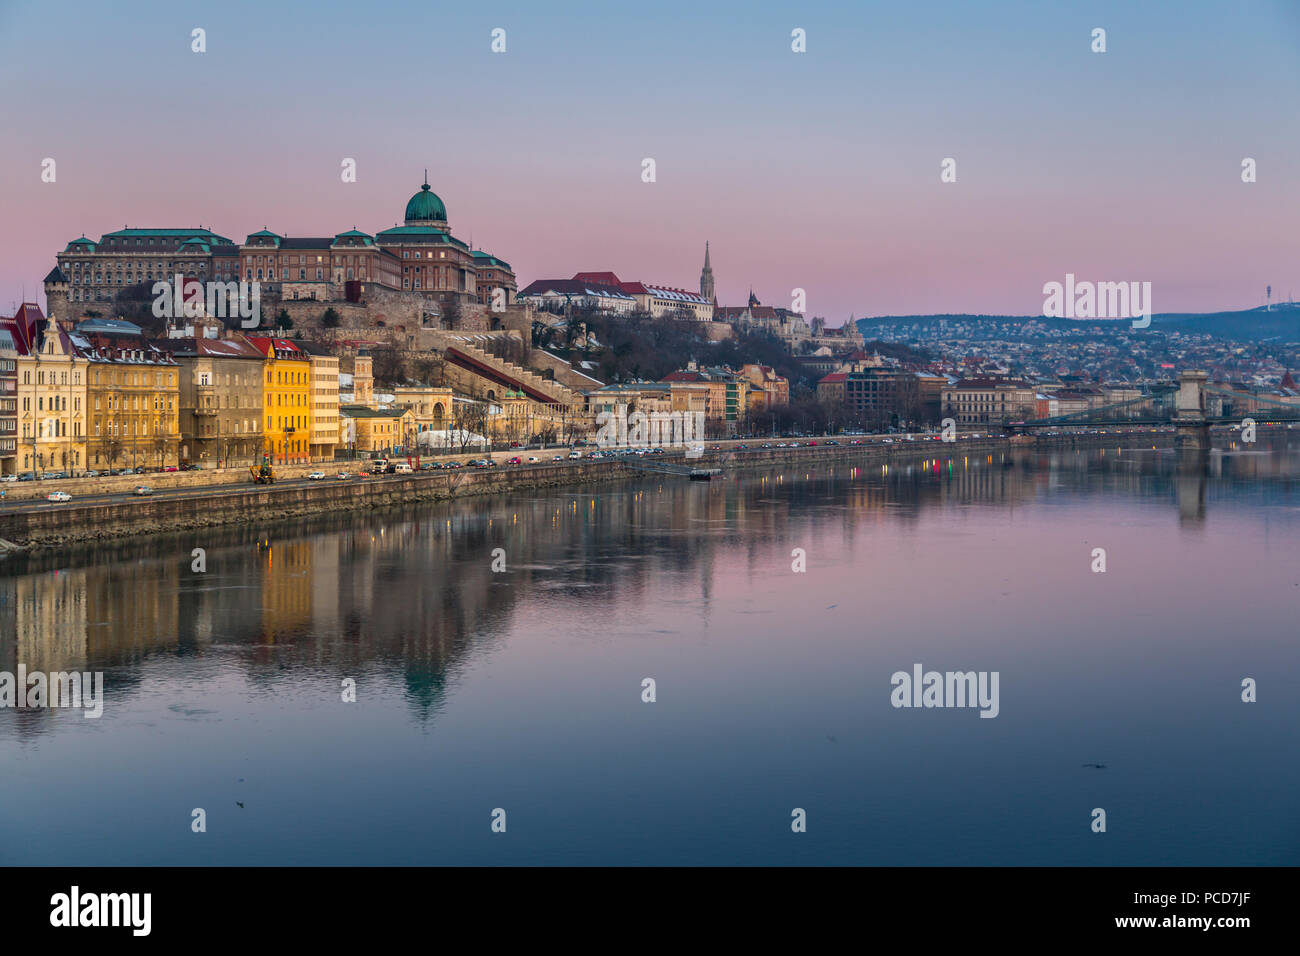 View of Budapest Castle reflecting in the Danube River during early morning, UNESCO World Heritage Site, Budapest, Hungary, Europe Stock Photo